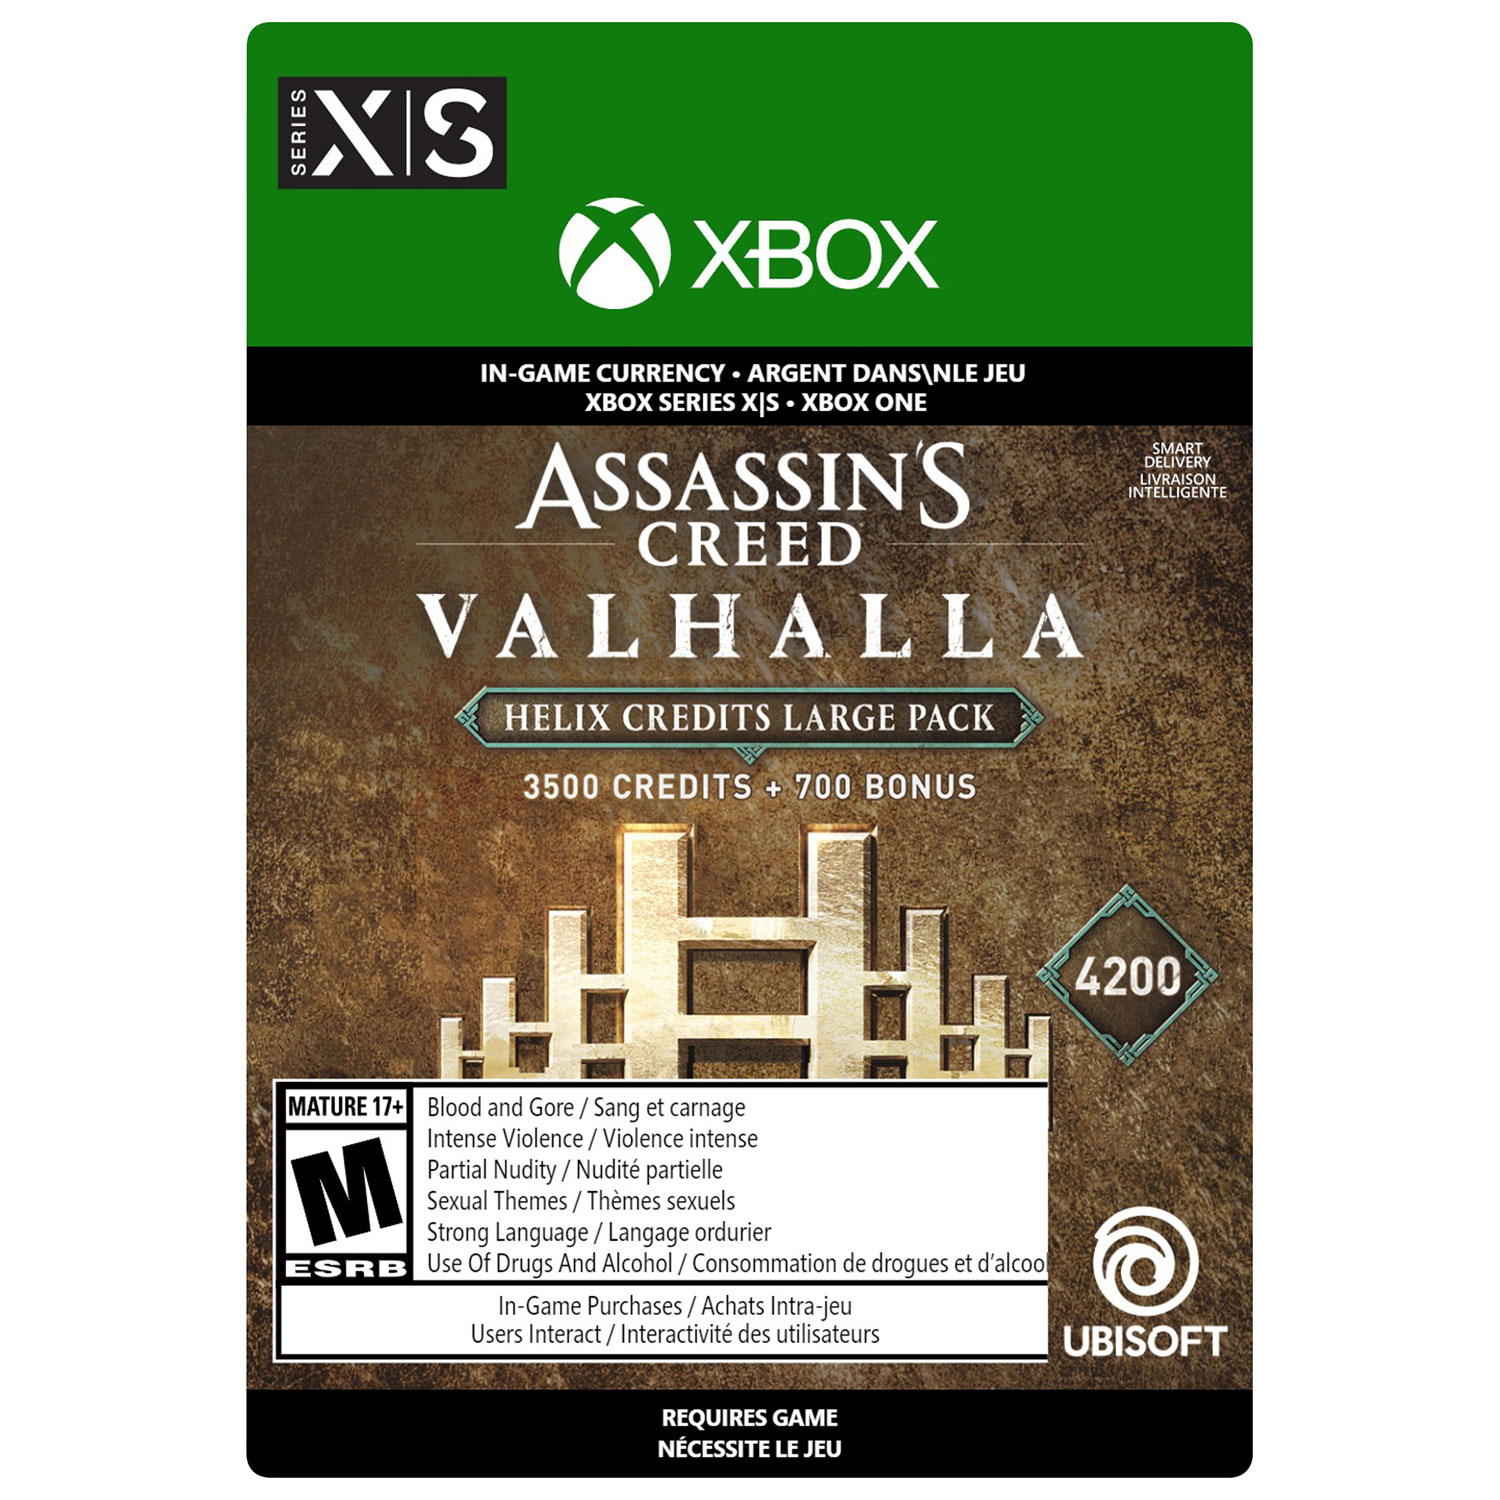 Assassin's Creed Valhalla - 4200 Helix Credits (Xbox Series X|S / Xbox One) - Digital Download